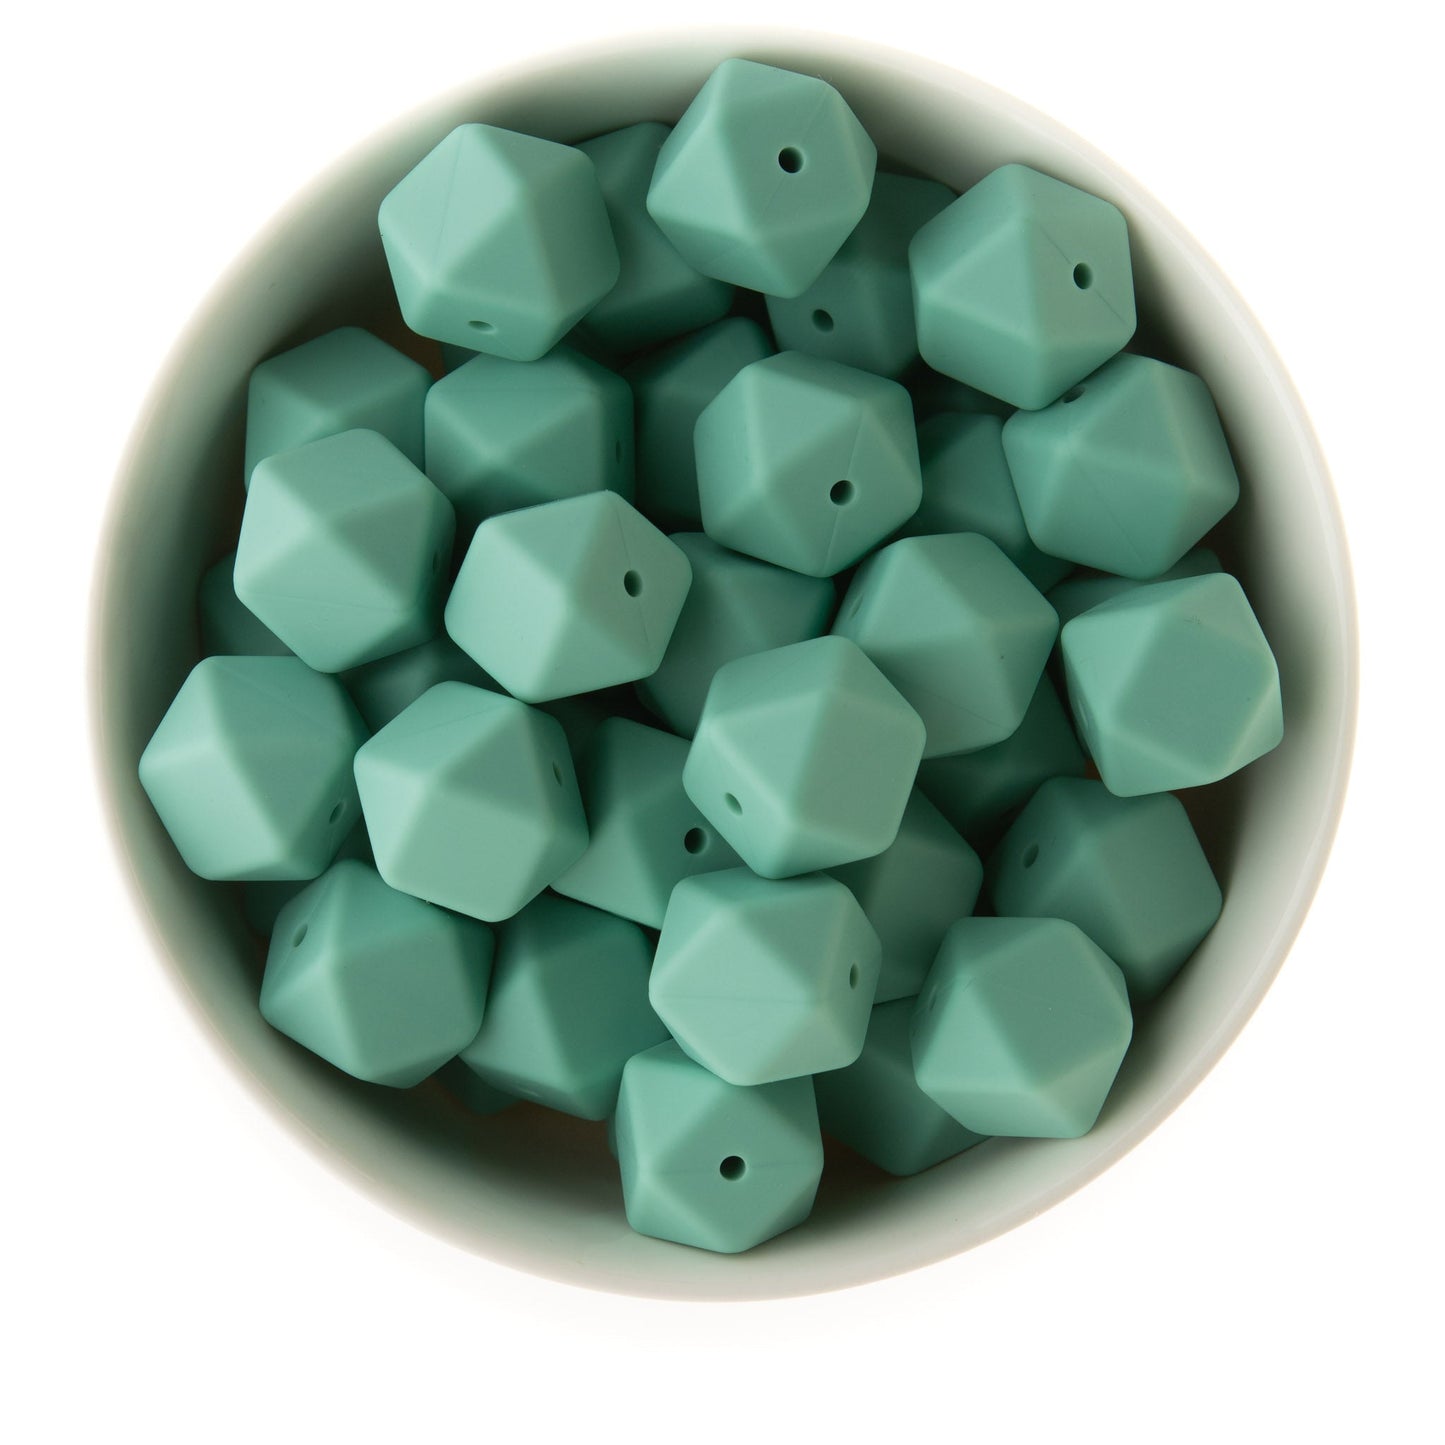 17mm Silicone Hexagon Beads